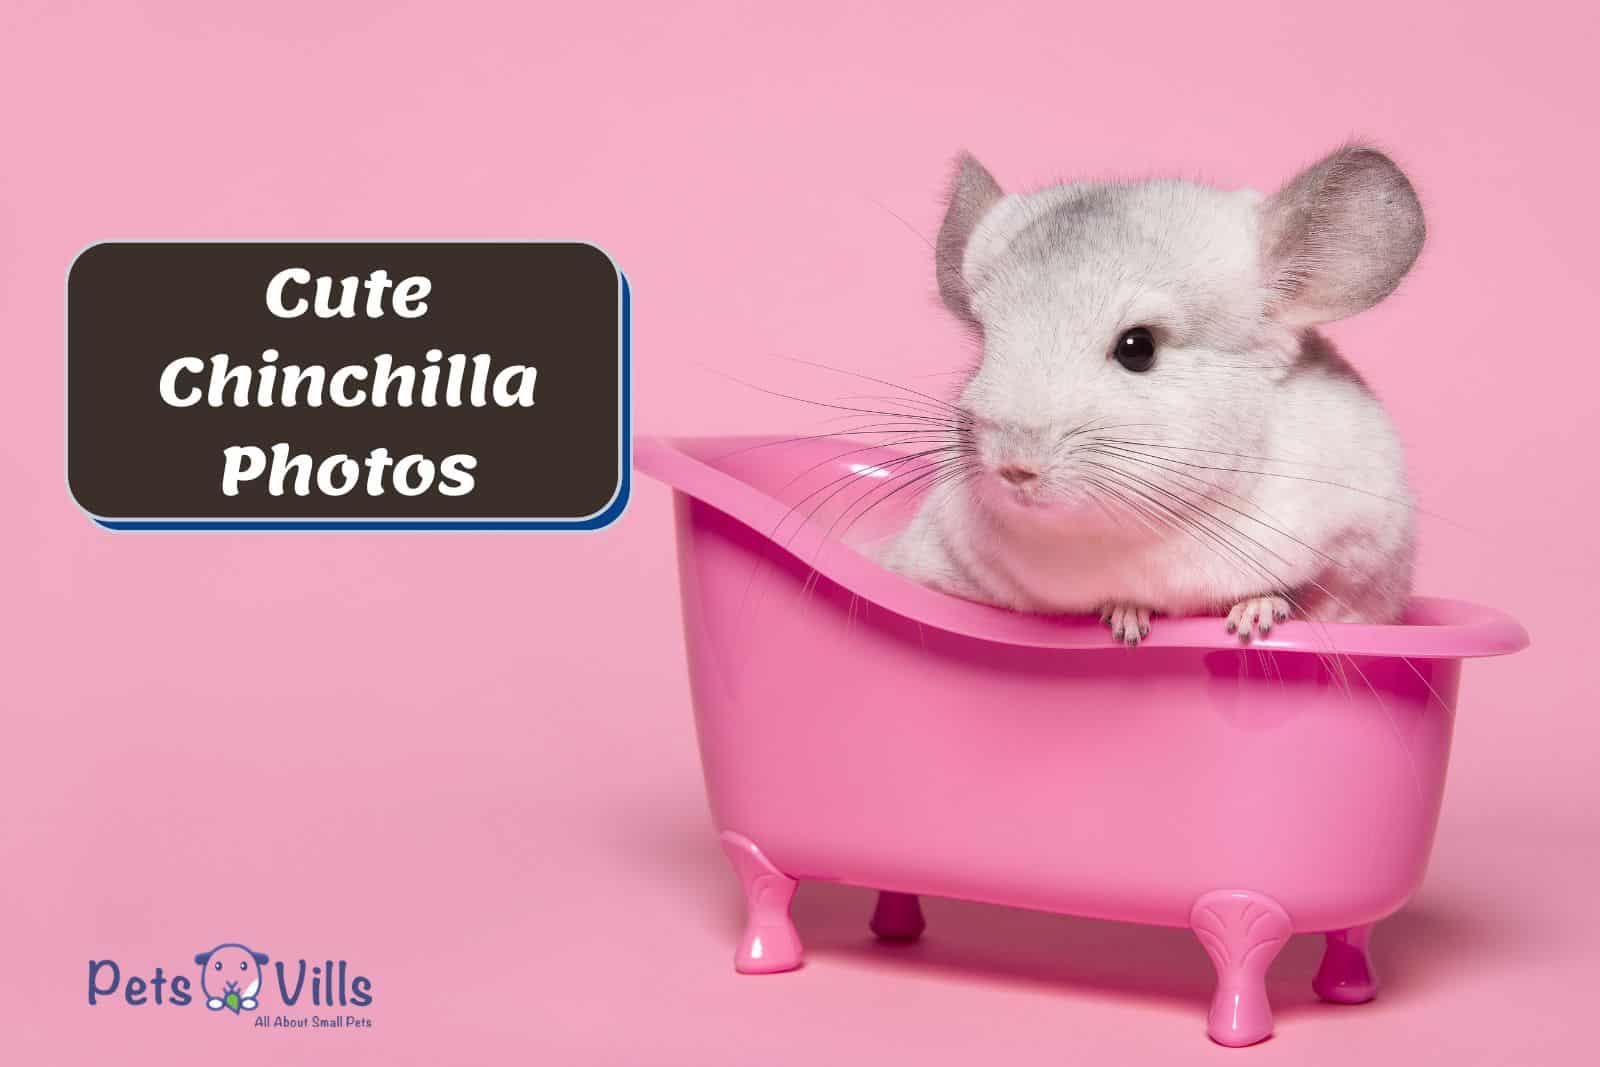 photo of a cute chinchilla in a pink tub